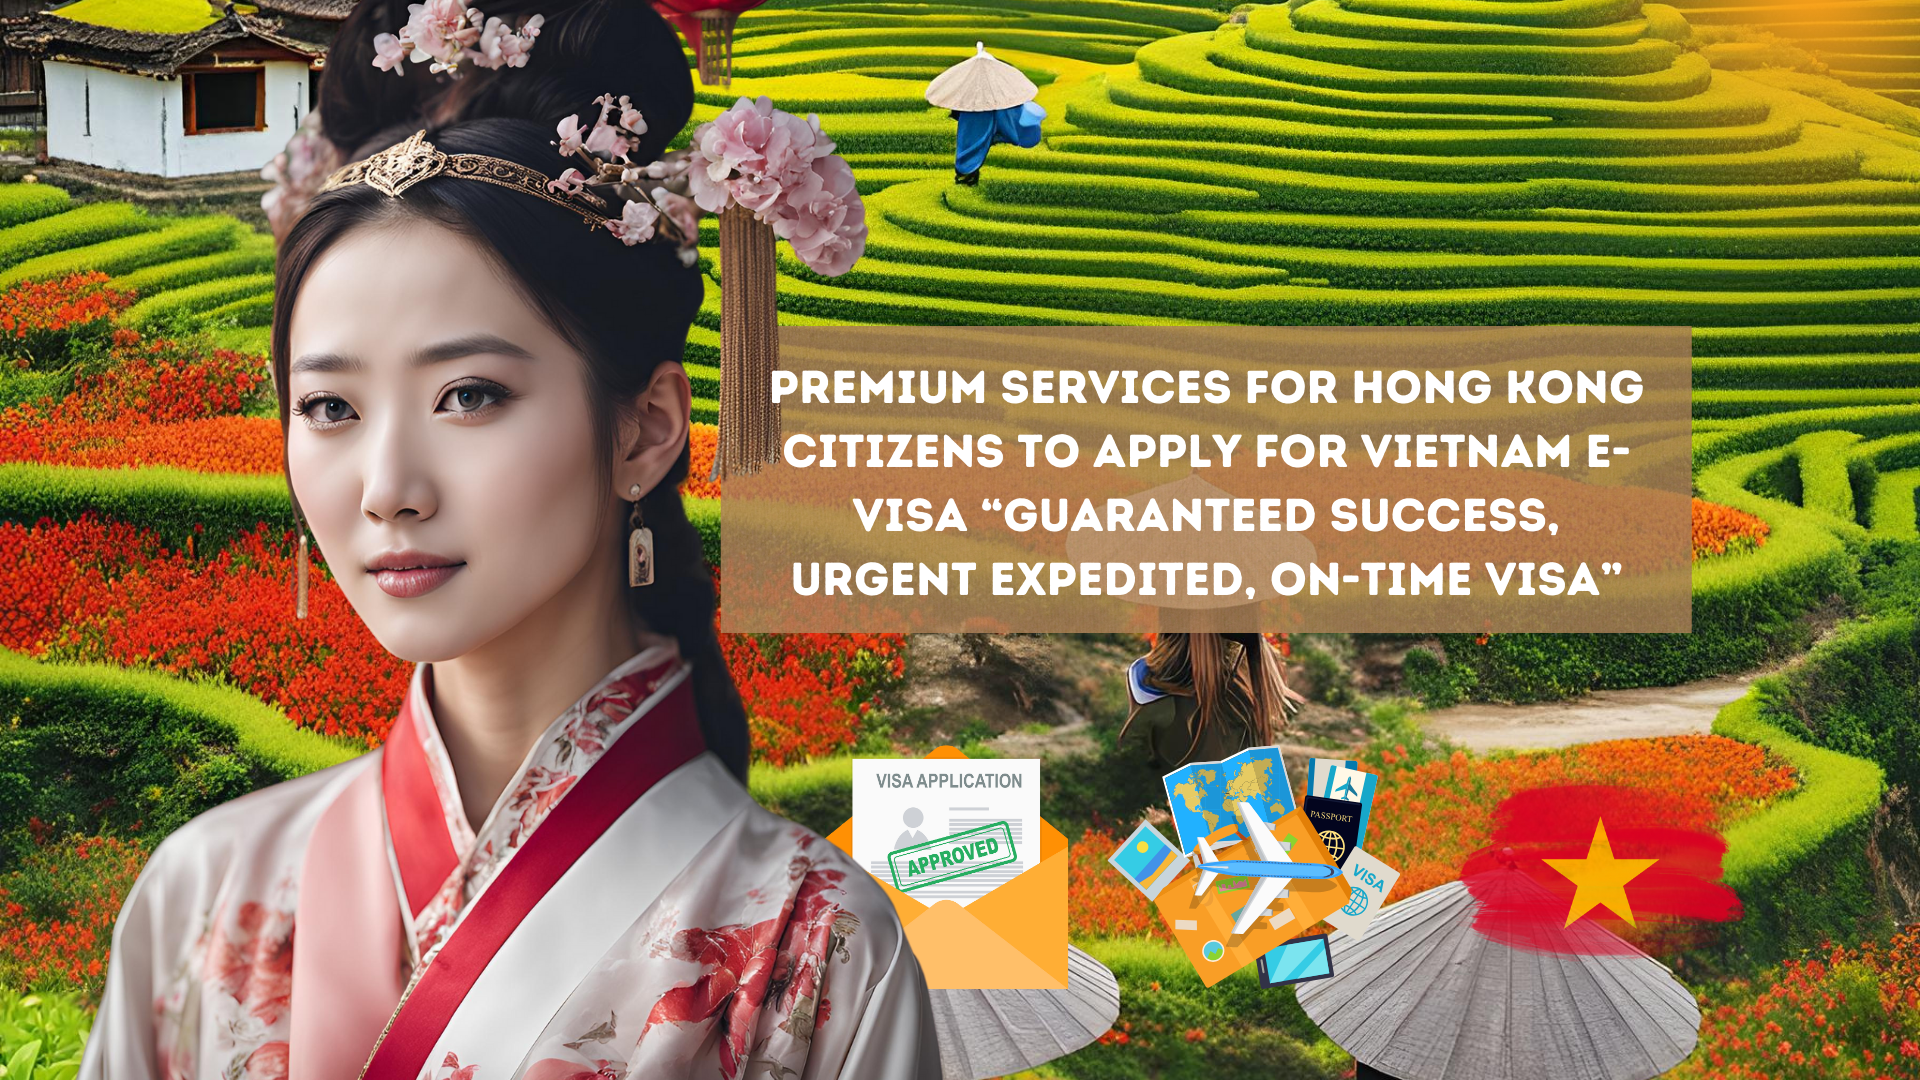 Premium Services for Hong Kong Citizens to apply for Vietnam e-visa “Guaranteed success, urgent expedited, on-time visa”